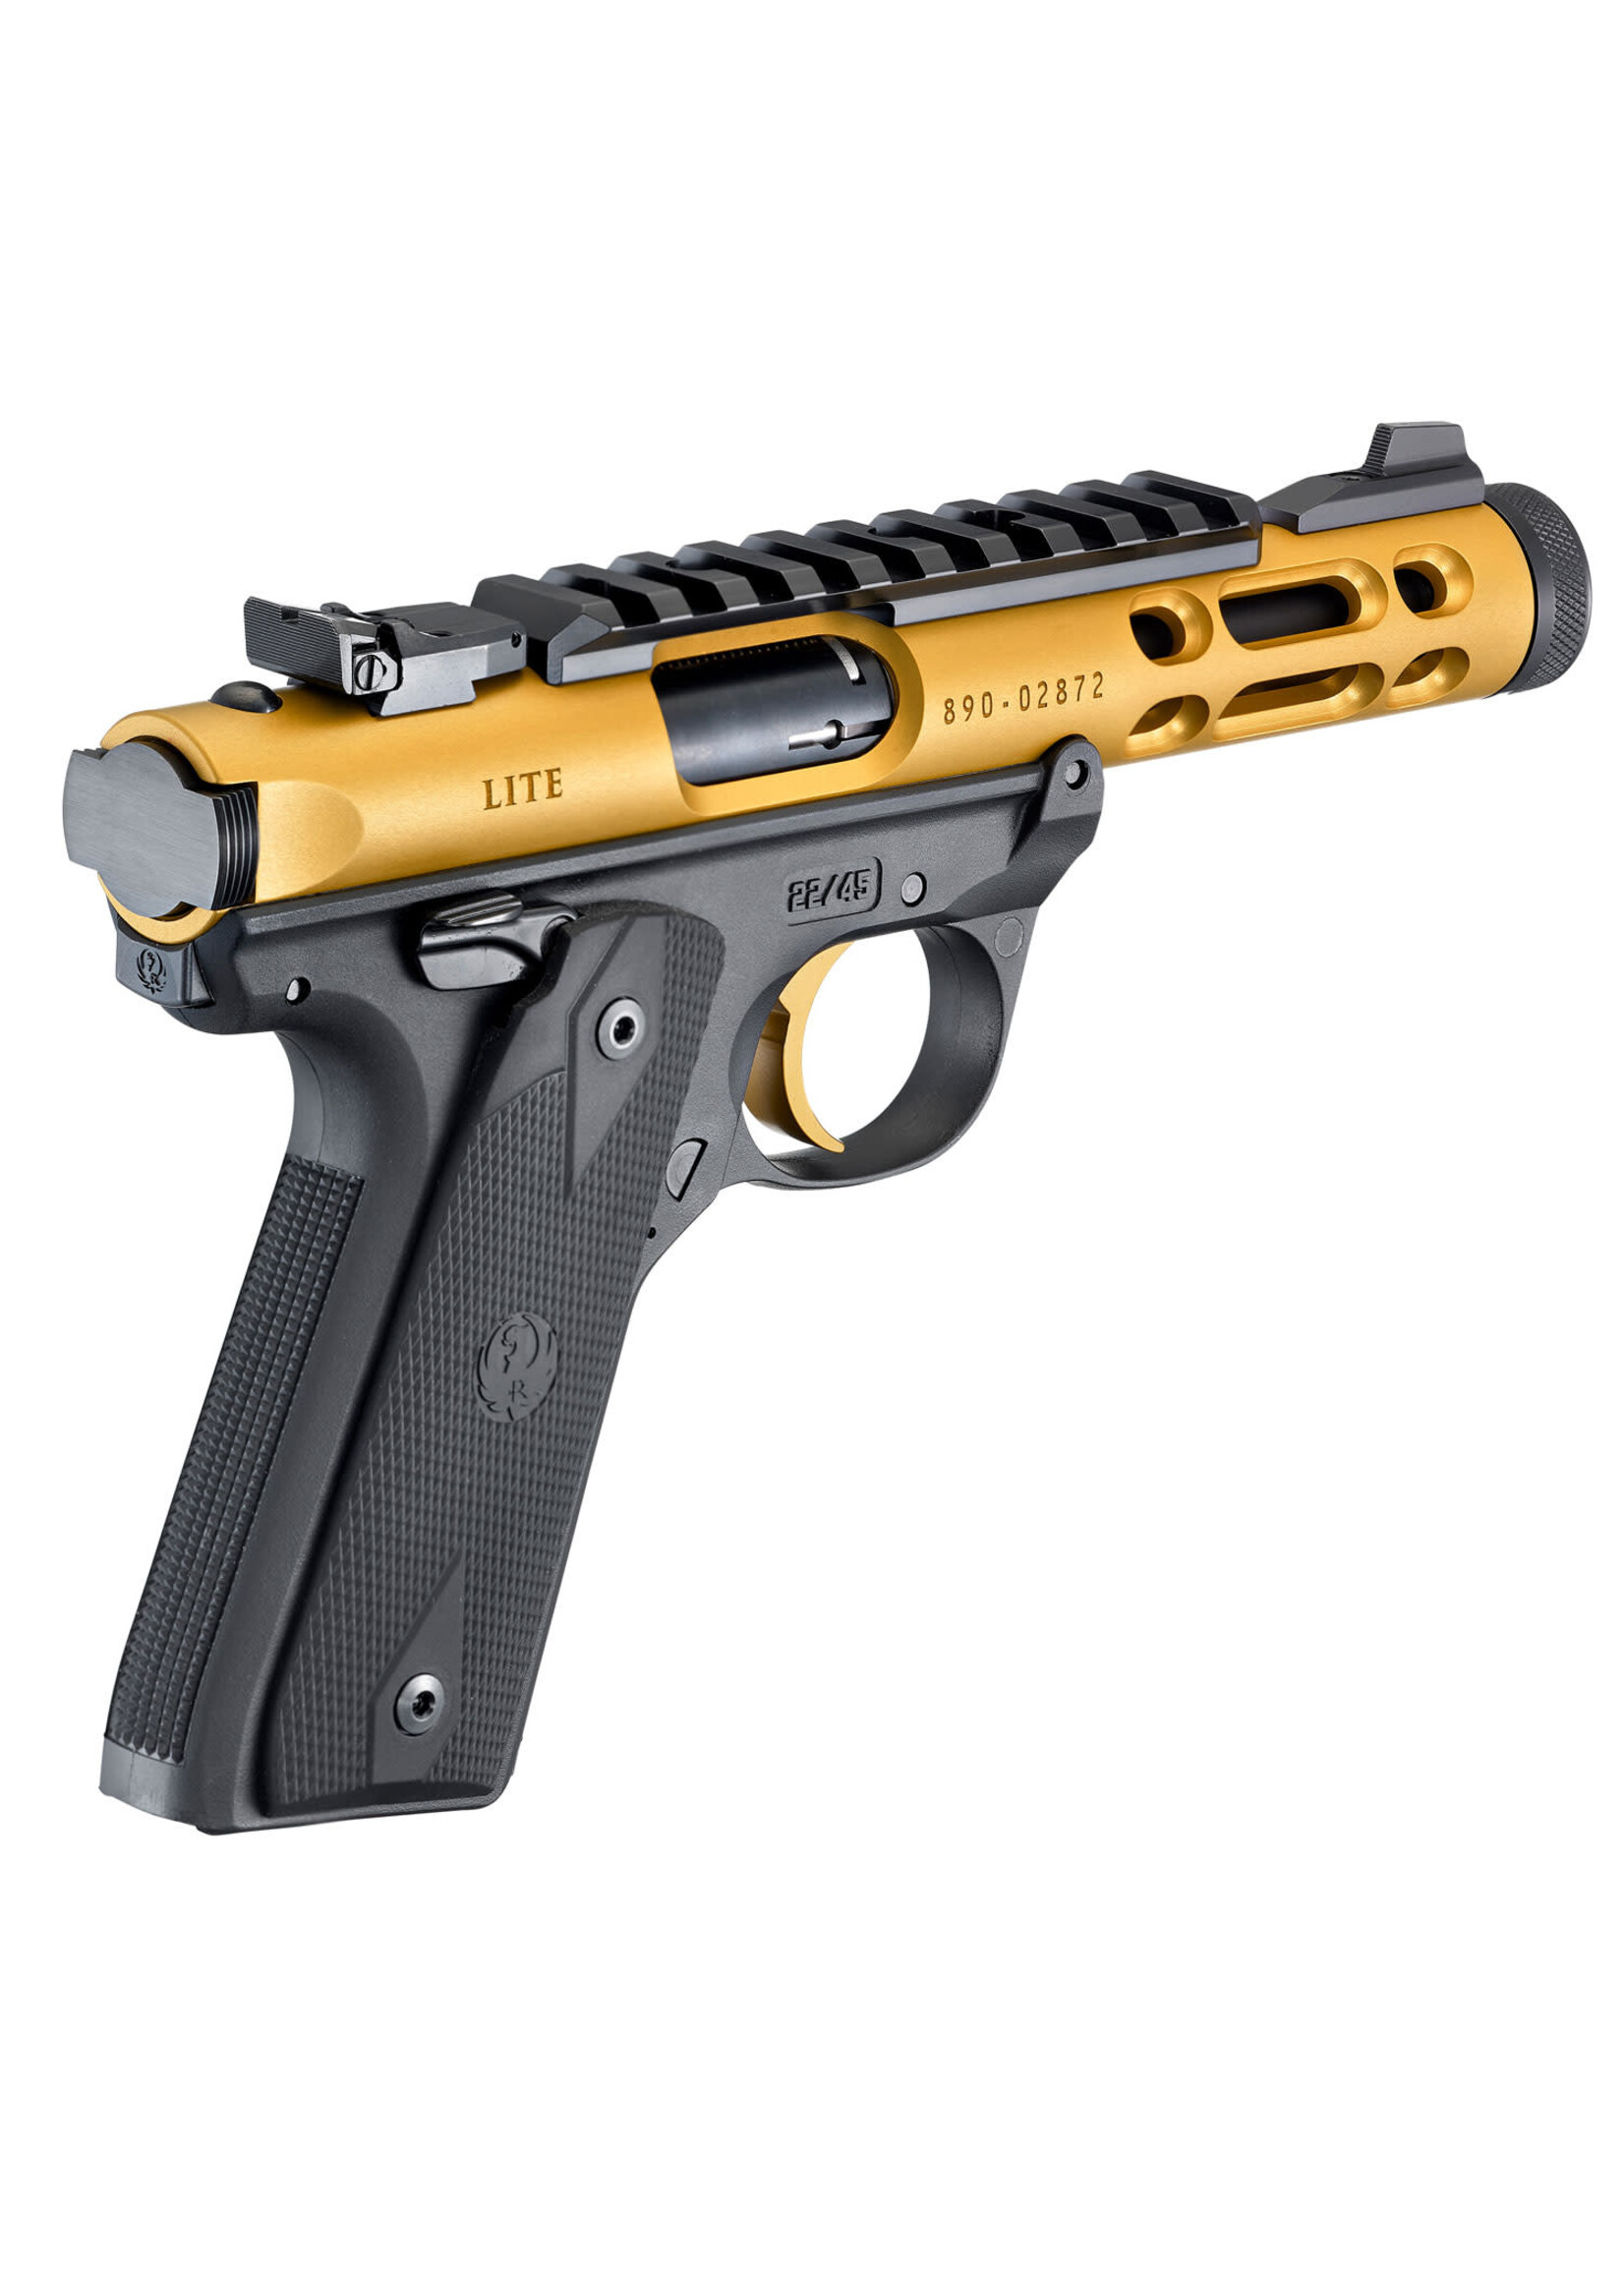 Ruger Ruger 43926 Mark IV 22/45 22 LR 10+1 4.40" Black Steel/Threaded Barrel, Gold Anodized Ventilated Aluminum w/Picatinny Rail Slide, Checkered 1911-Style Panel Grip